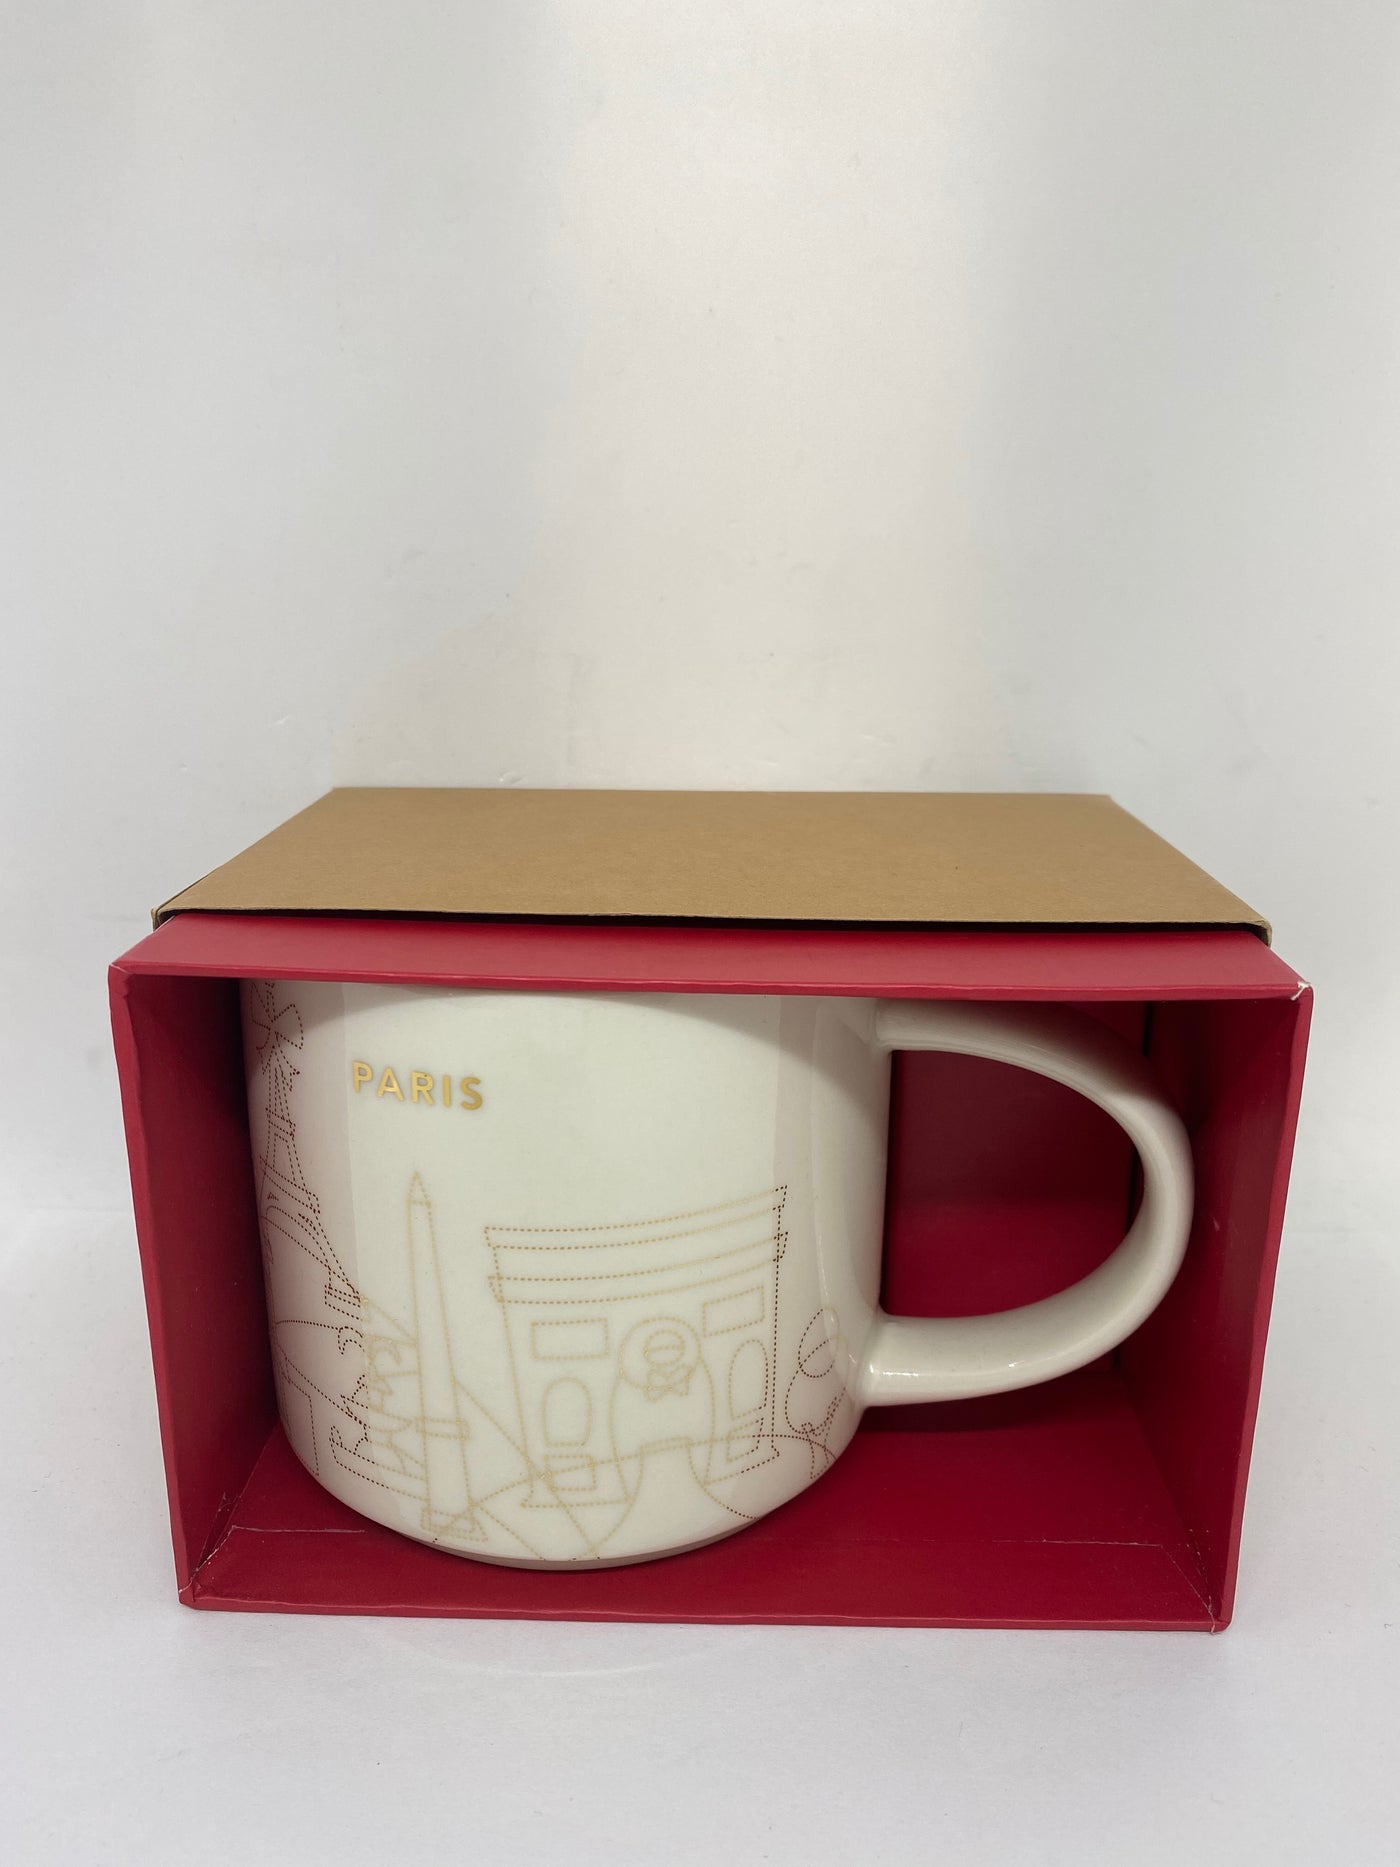 Starbucks You Are Here Collection Holiday Paris France Coffee Mug New Box